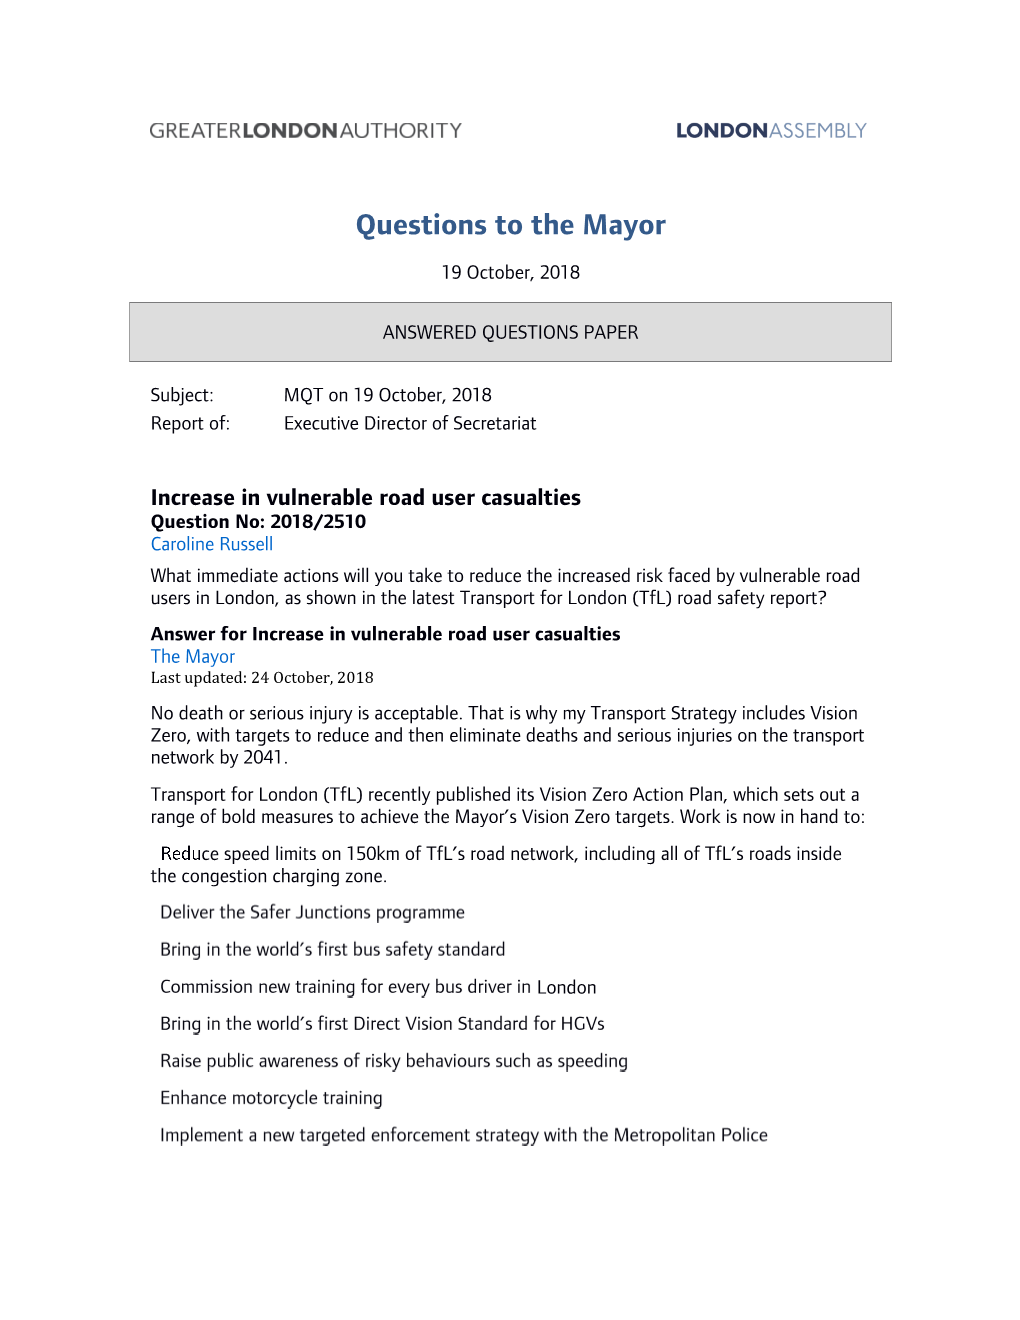 Minutes of Meetings? Answer for London Crime Reduction Board (2) the Mayor Last Updated: 24 October, 2018 Officers Are Drafting a Response